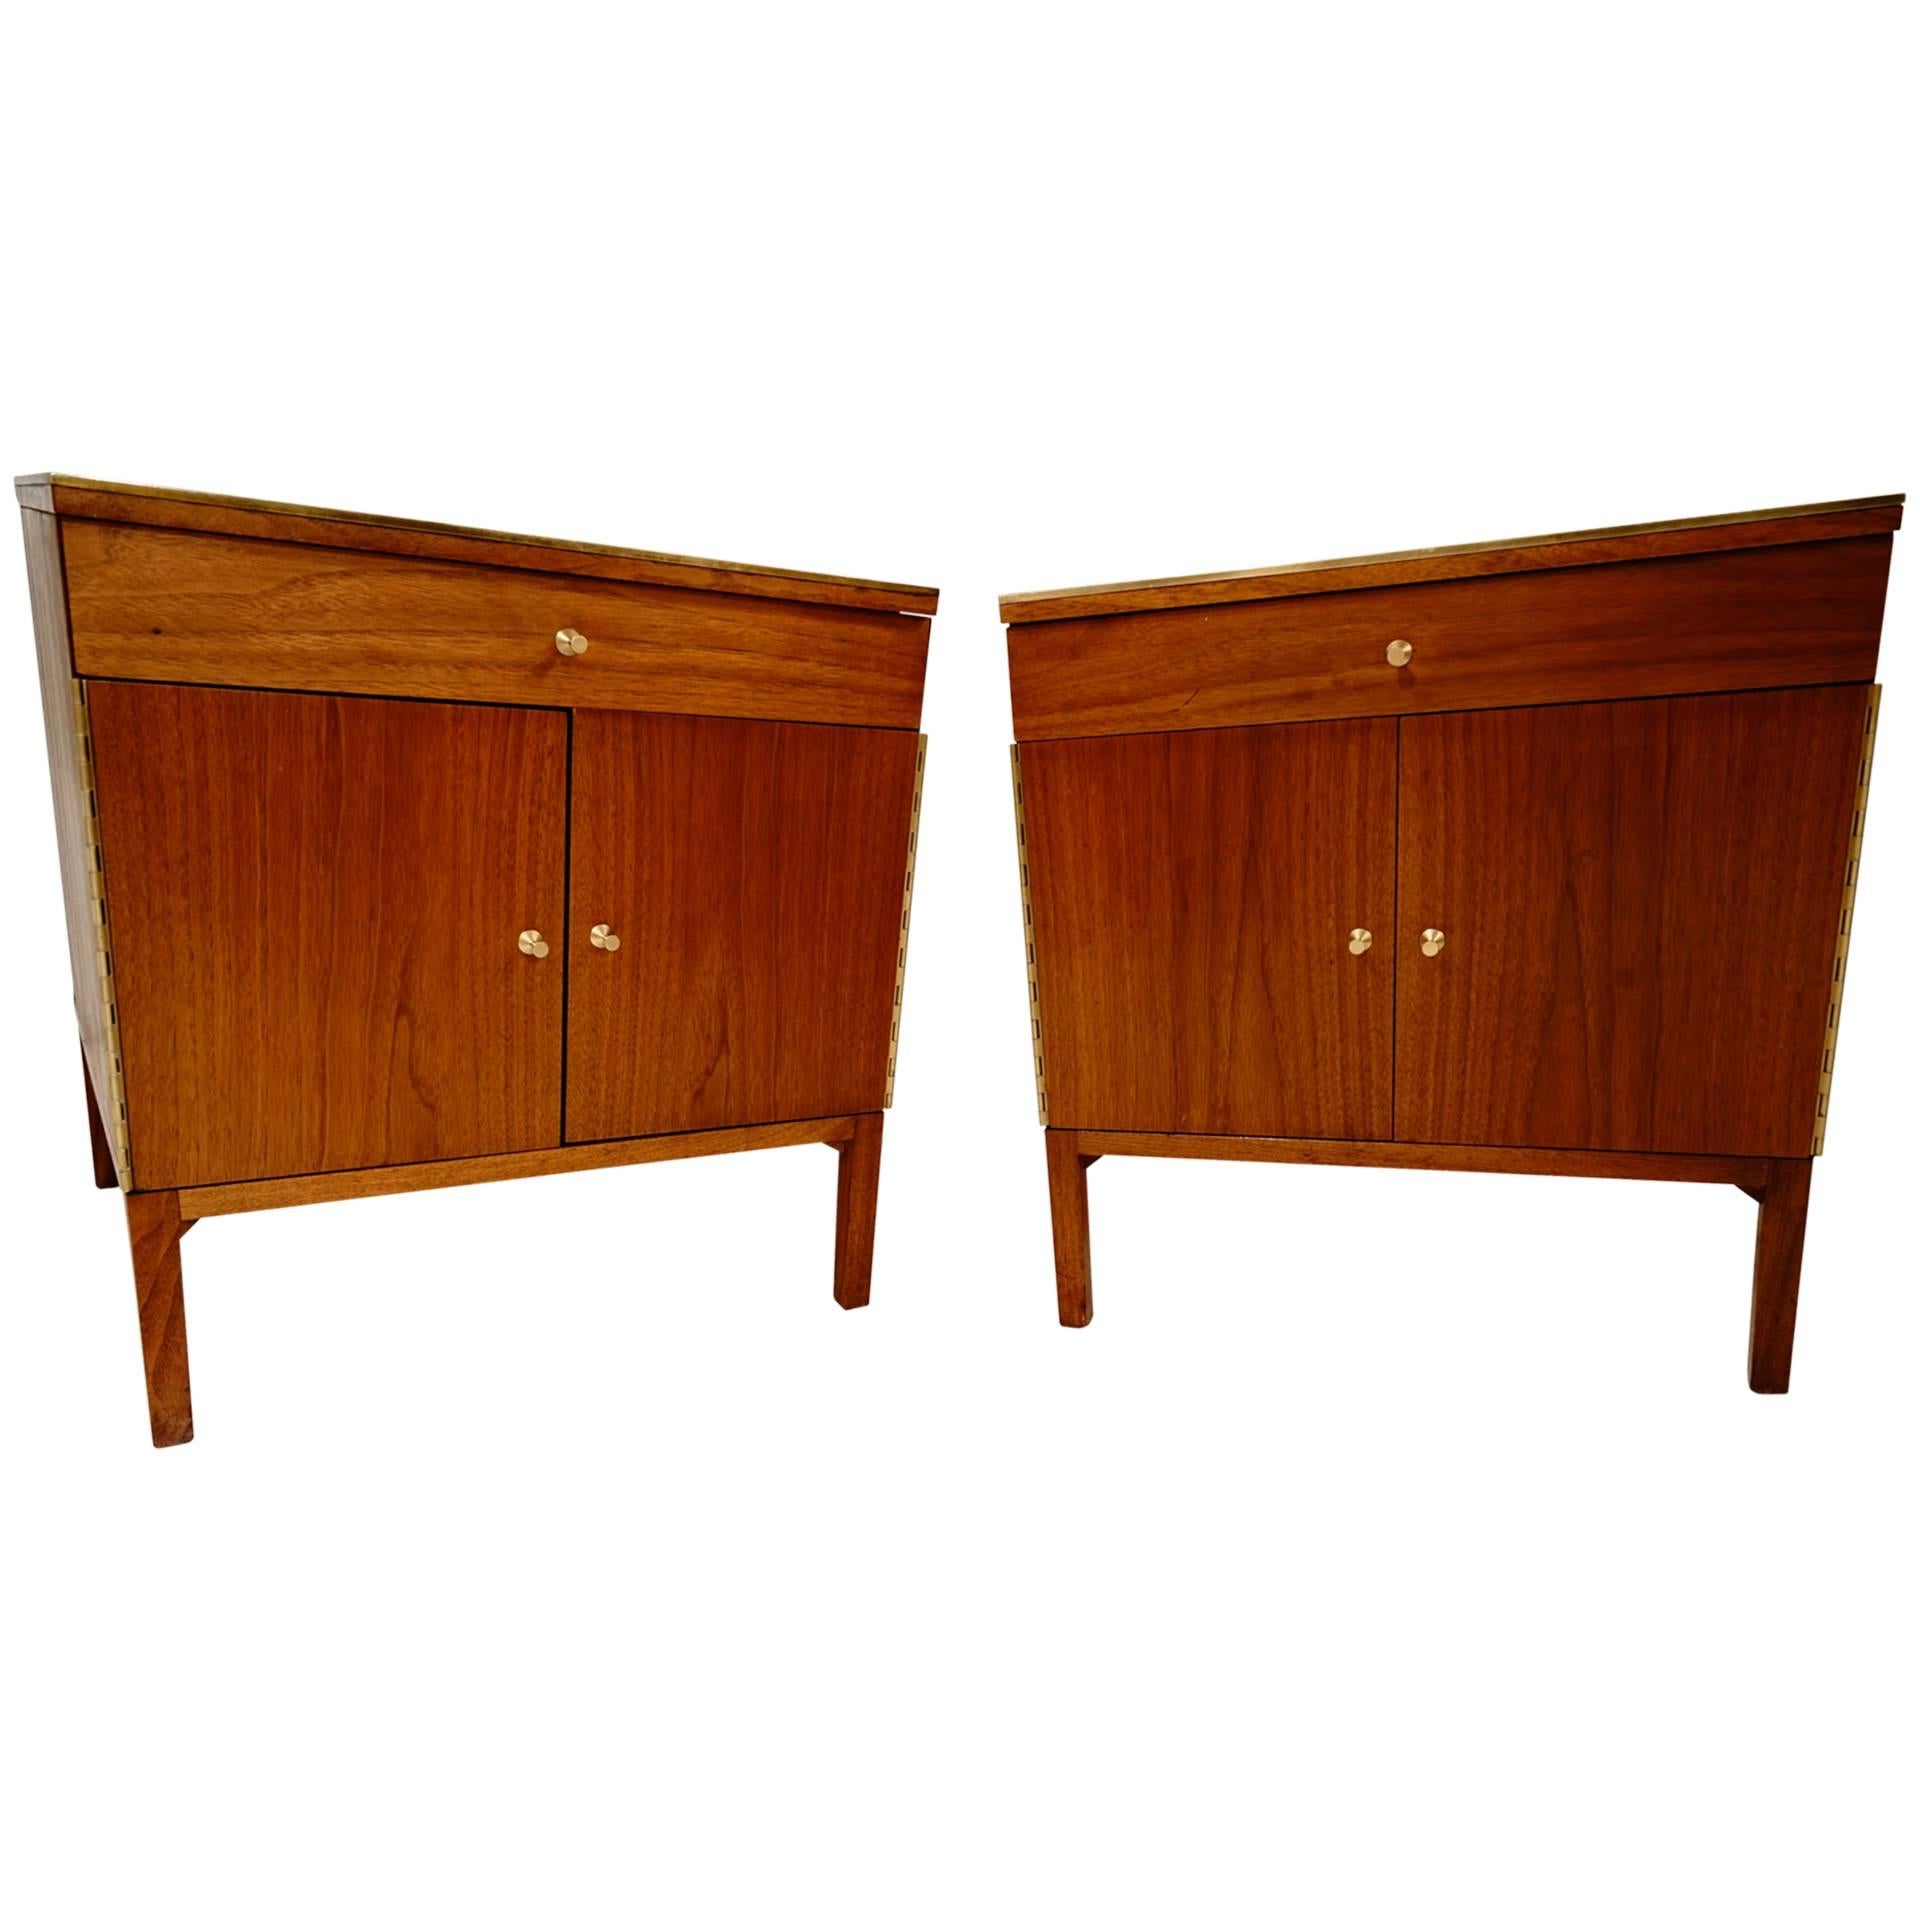 Magnificent Pair of Paul McCobb Nightstands with Leather Top